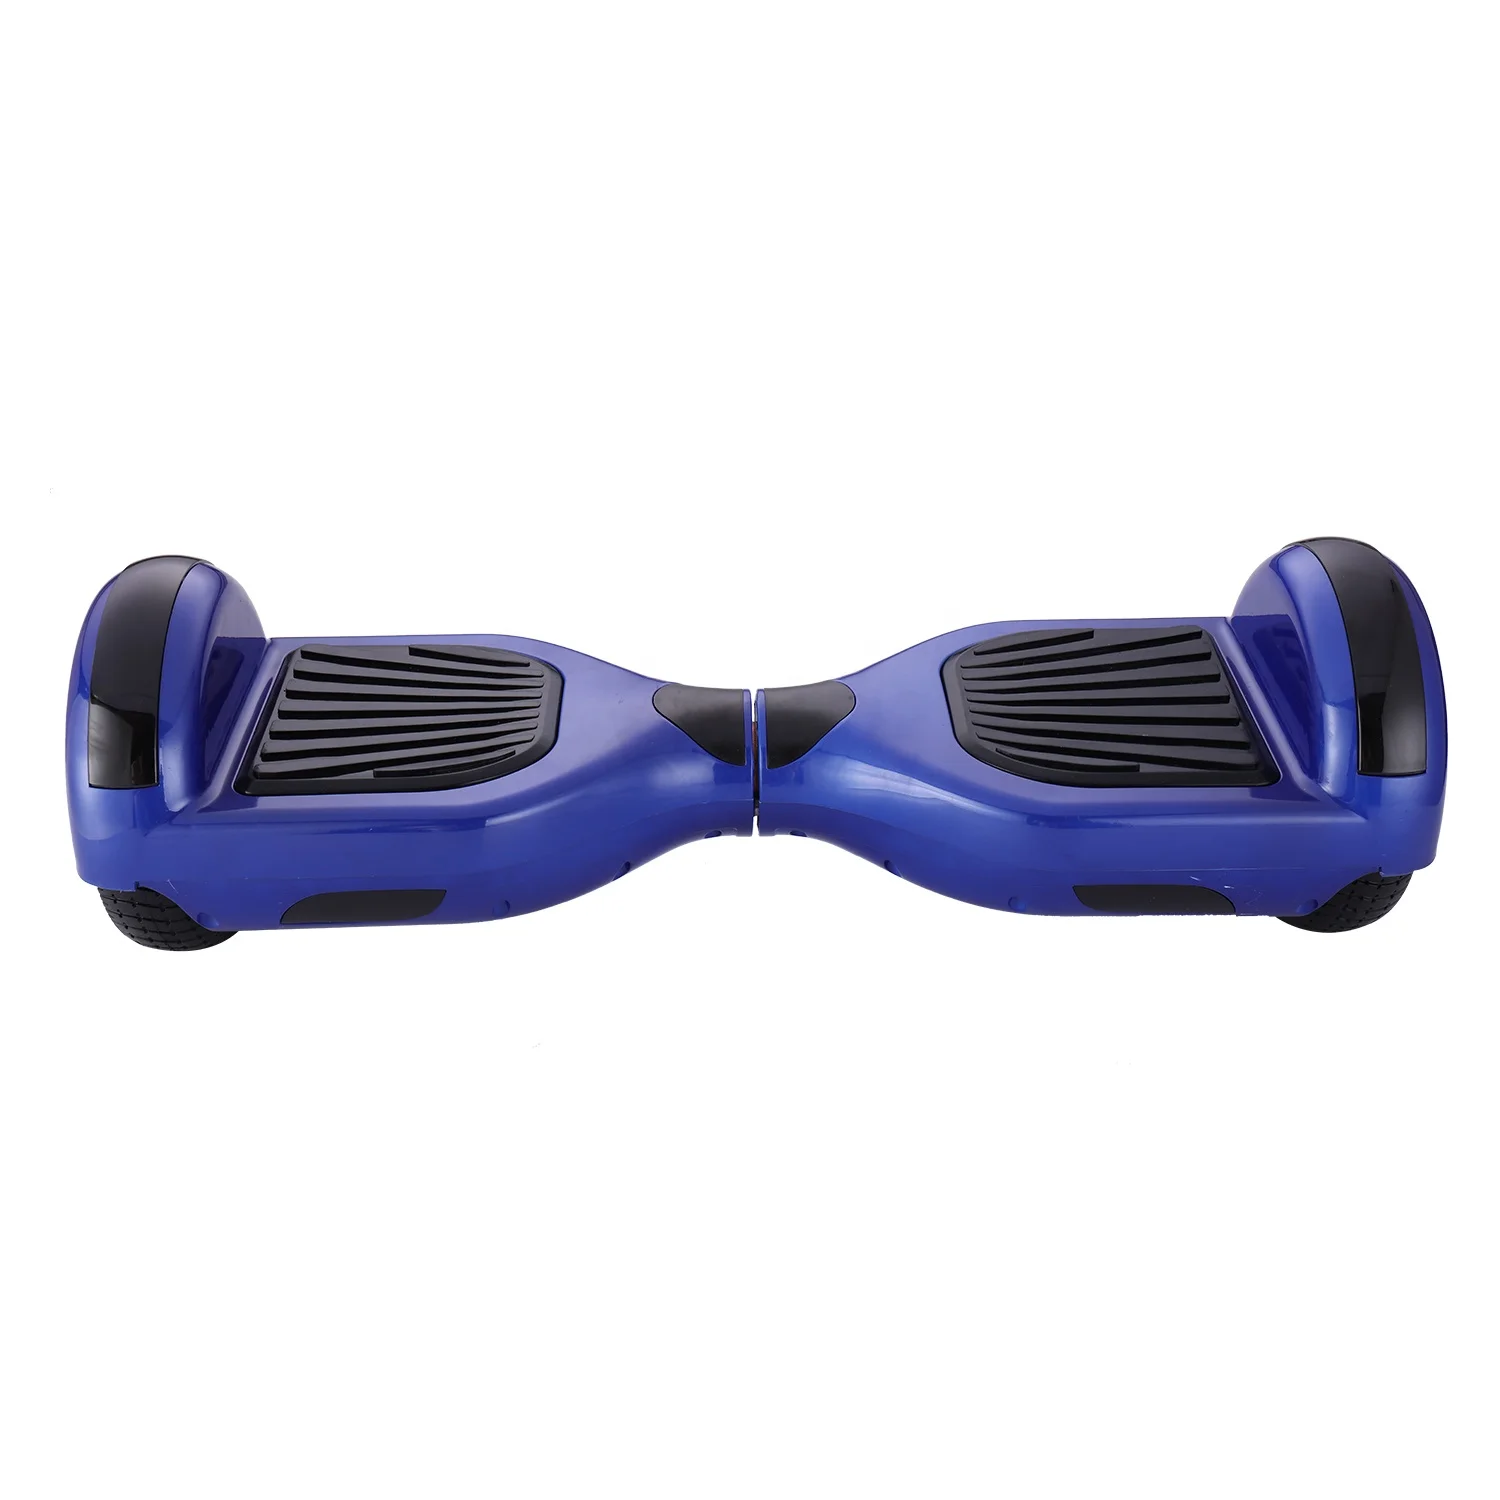 

6.5 blue tooth 201-500w Balance car off road hoverboards electric scooter hover board eu us warehouse for kids and adult, Customized